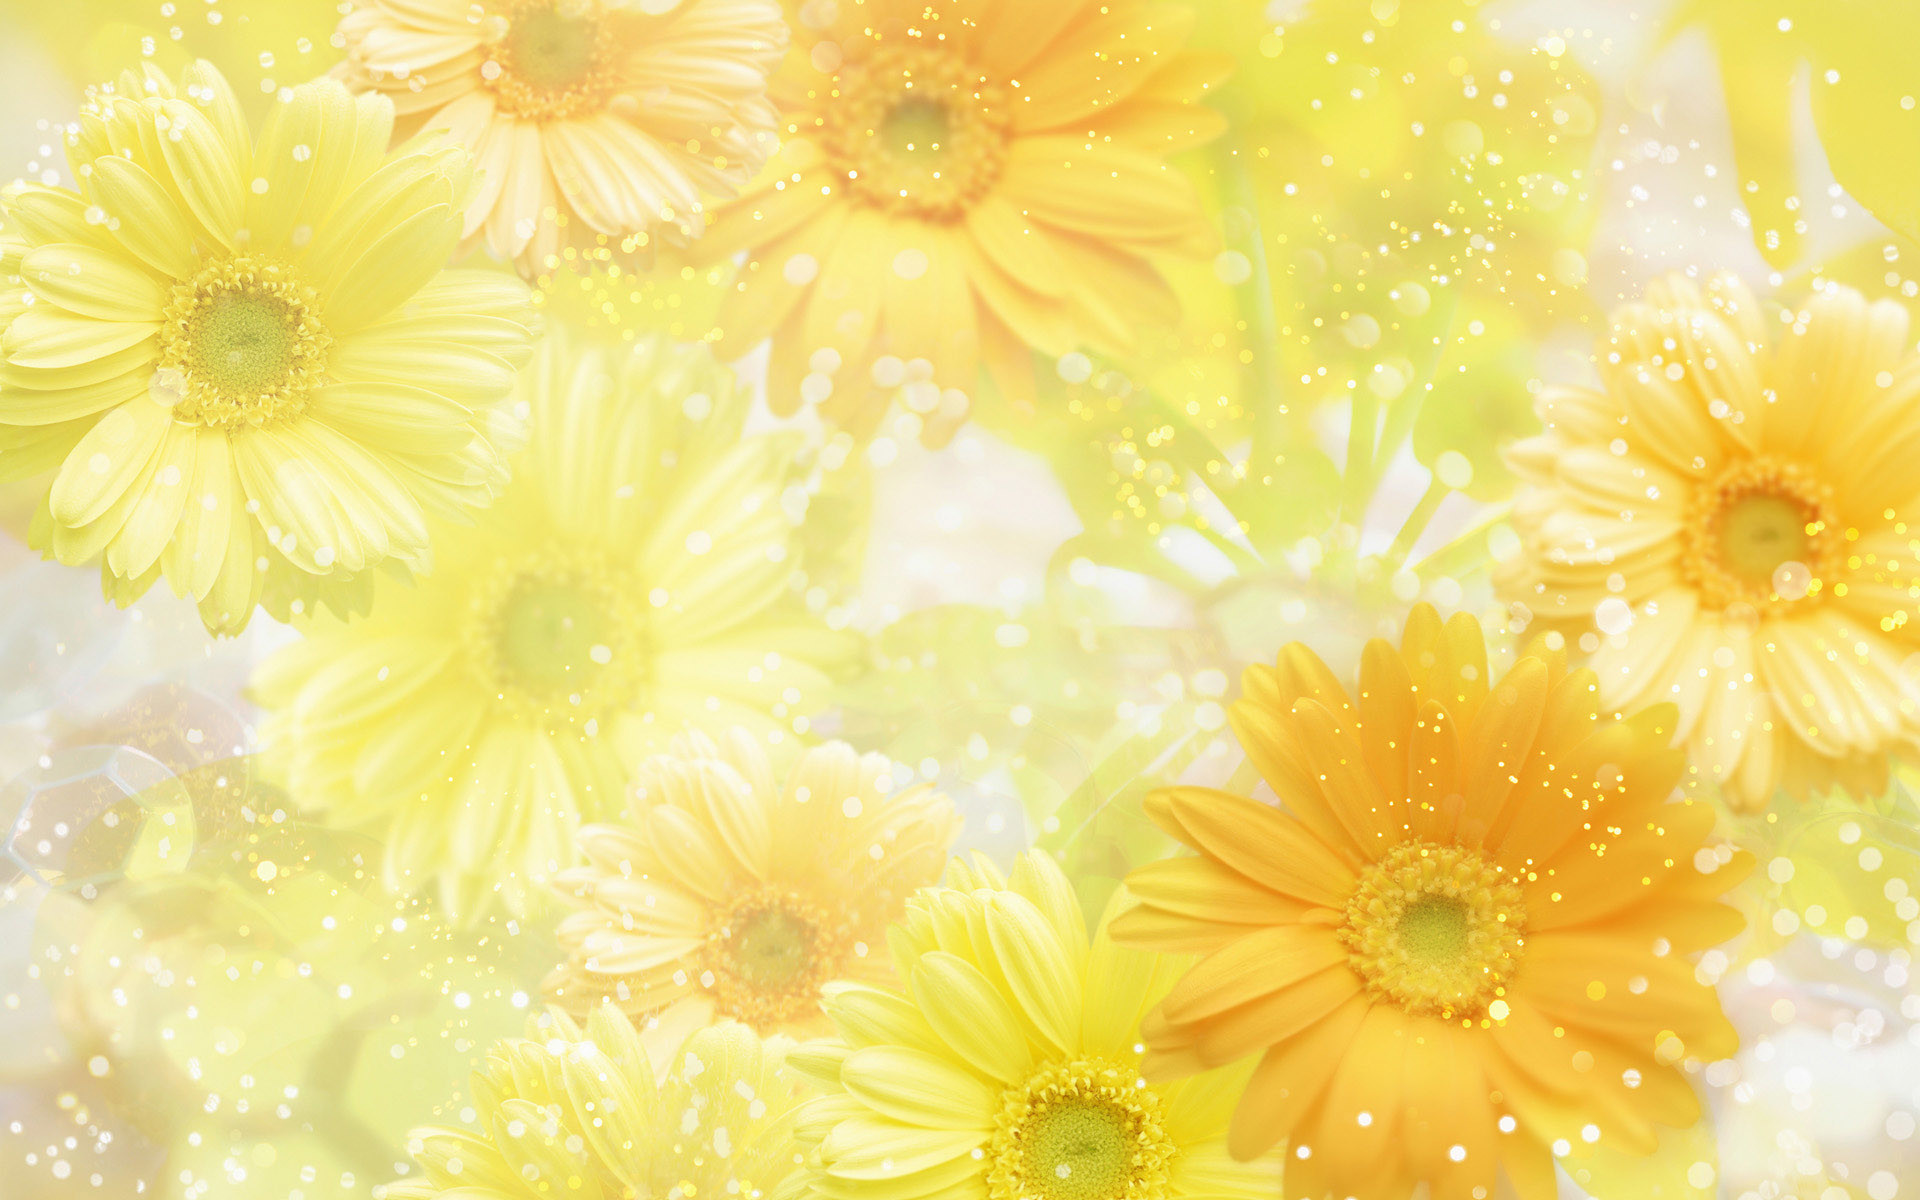 1920x1200 Image for Flowers background Flower wallpaper images of flower 11